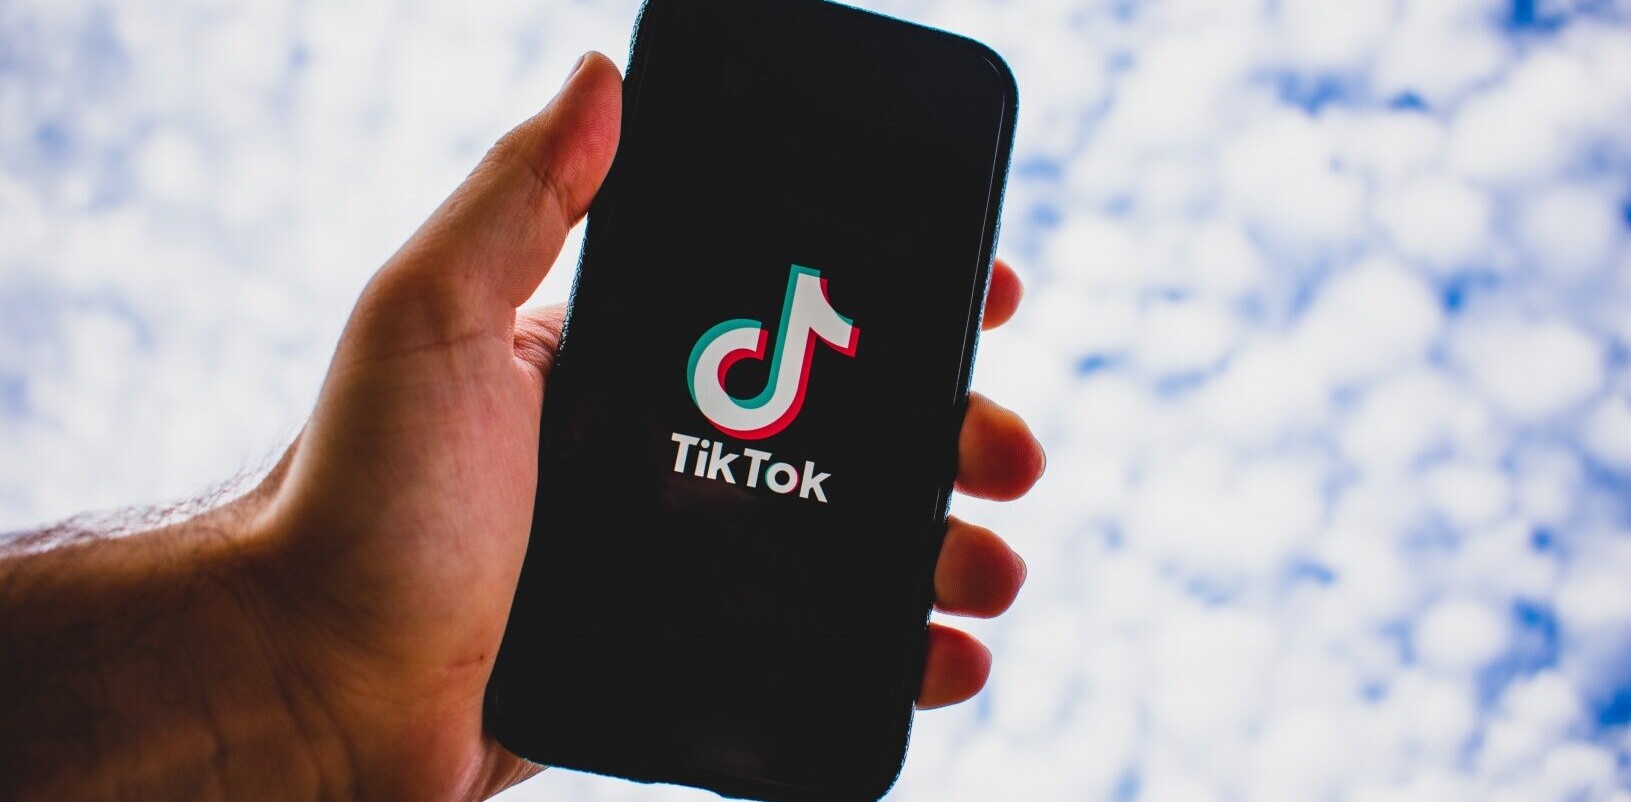 TikTok’s older version collected device identification data, violating Google’s app store policy